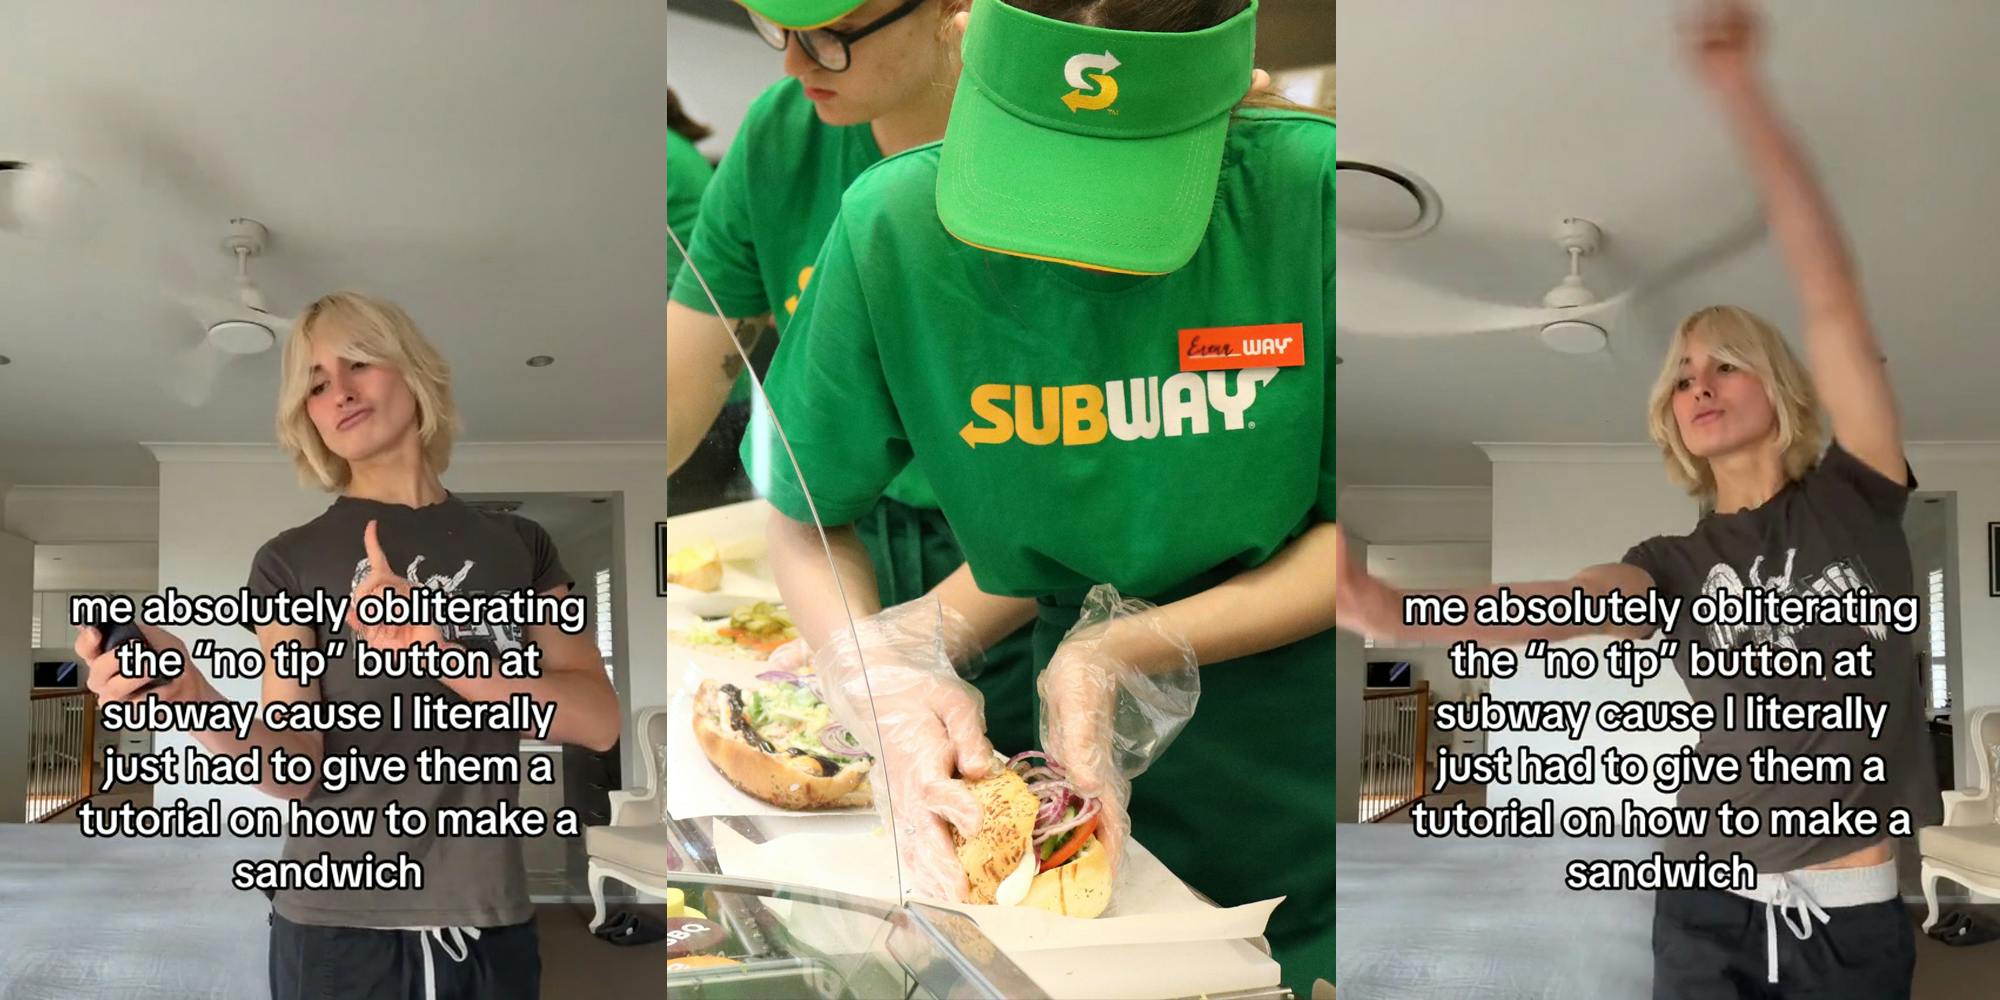 Subway customer with caption "me absolutely obliterating the "no tip" button at subway cause I literally just had to give them a tutorial on how to make a sandwich" (l) Subway employee making sandwich (c) Subway customer with caption "me absolutely obliterating the "no tip" button at subway cause I literally just had to give them a tutorial on how to make a sandwich" (r)